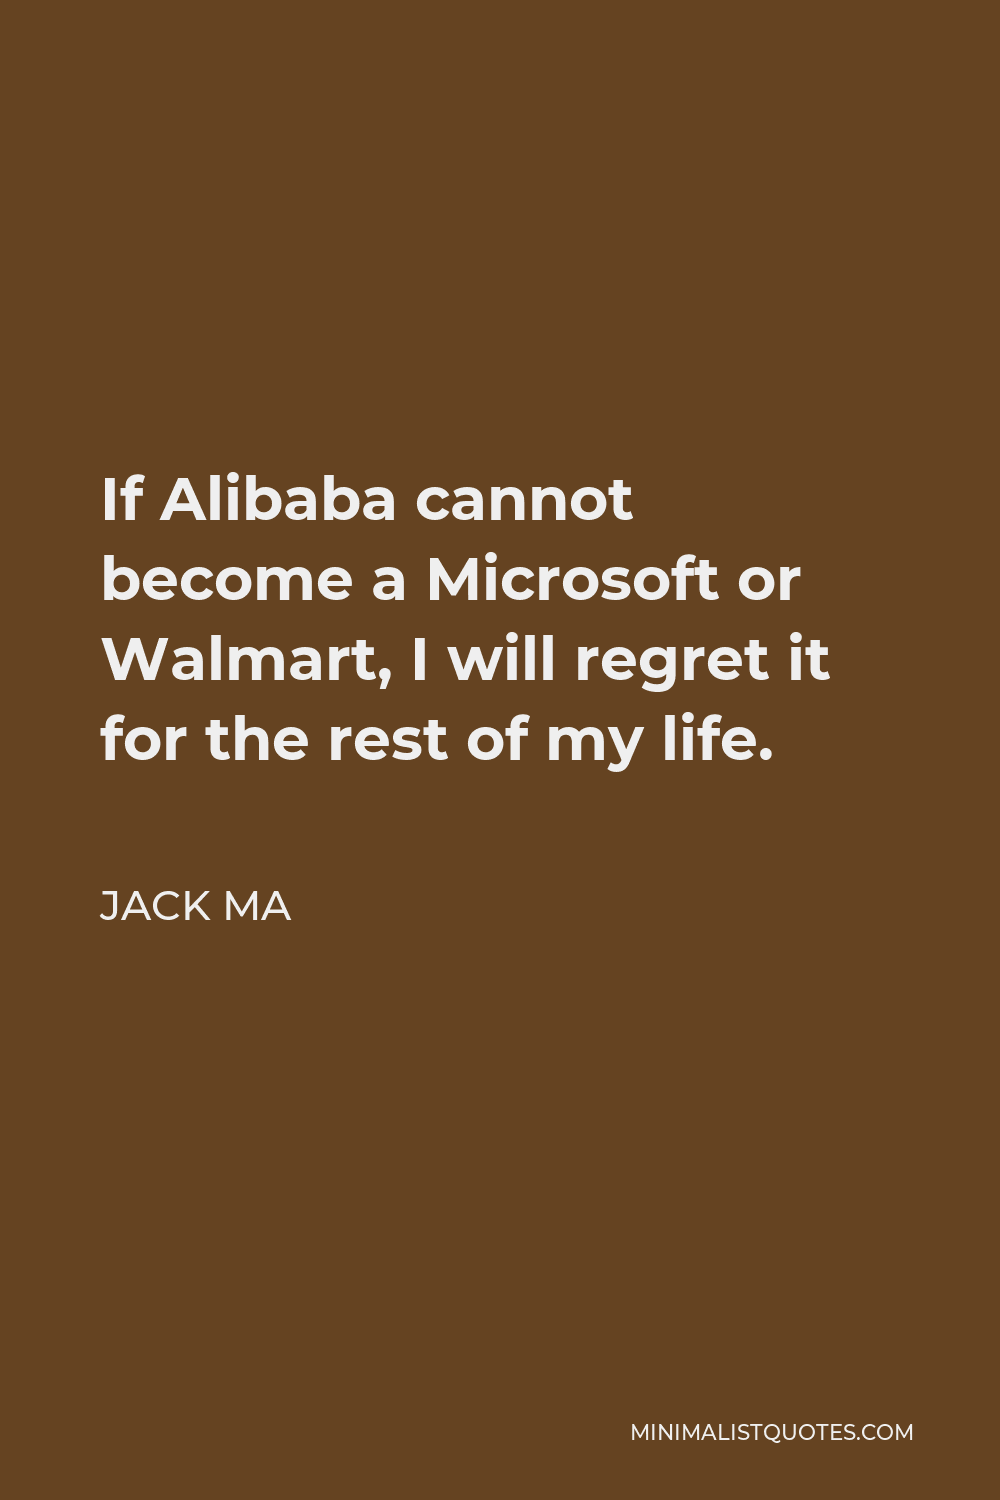 Jack Ma Quote - If Alibaba cannot become a Microsoft or Walmart, I will regret it for the rest of my life.